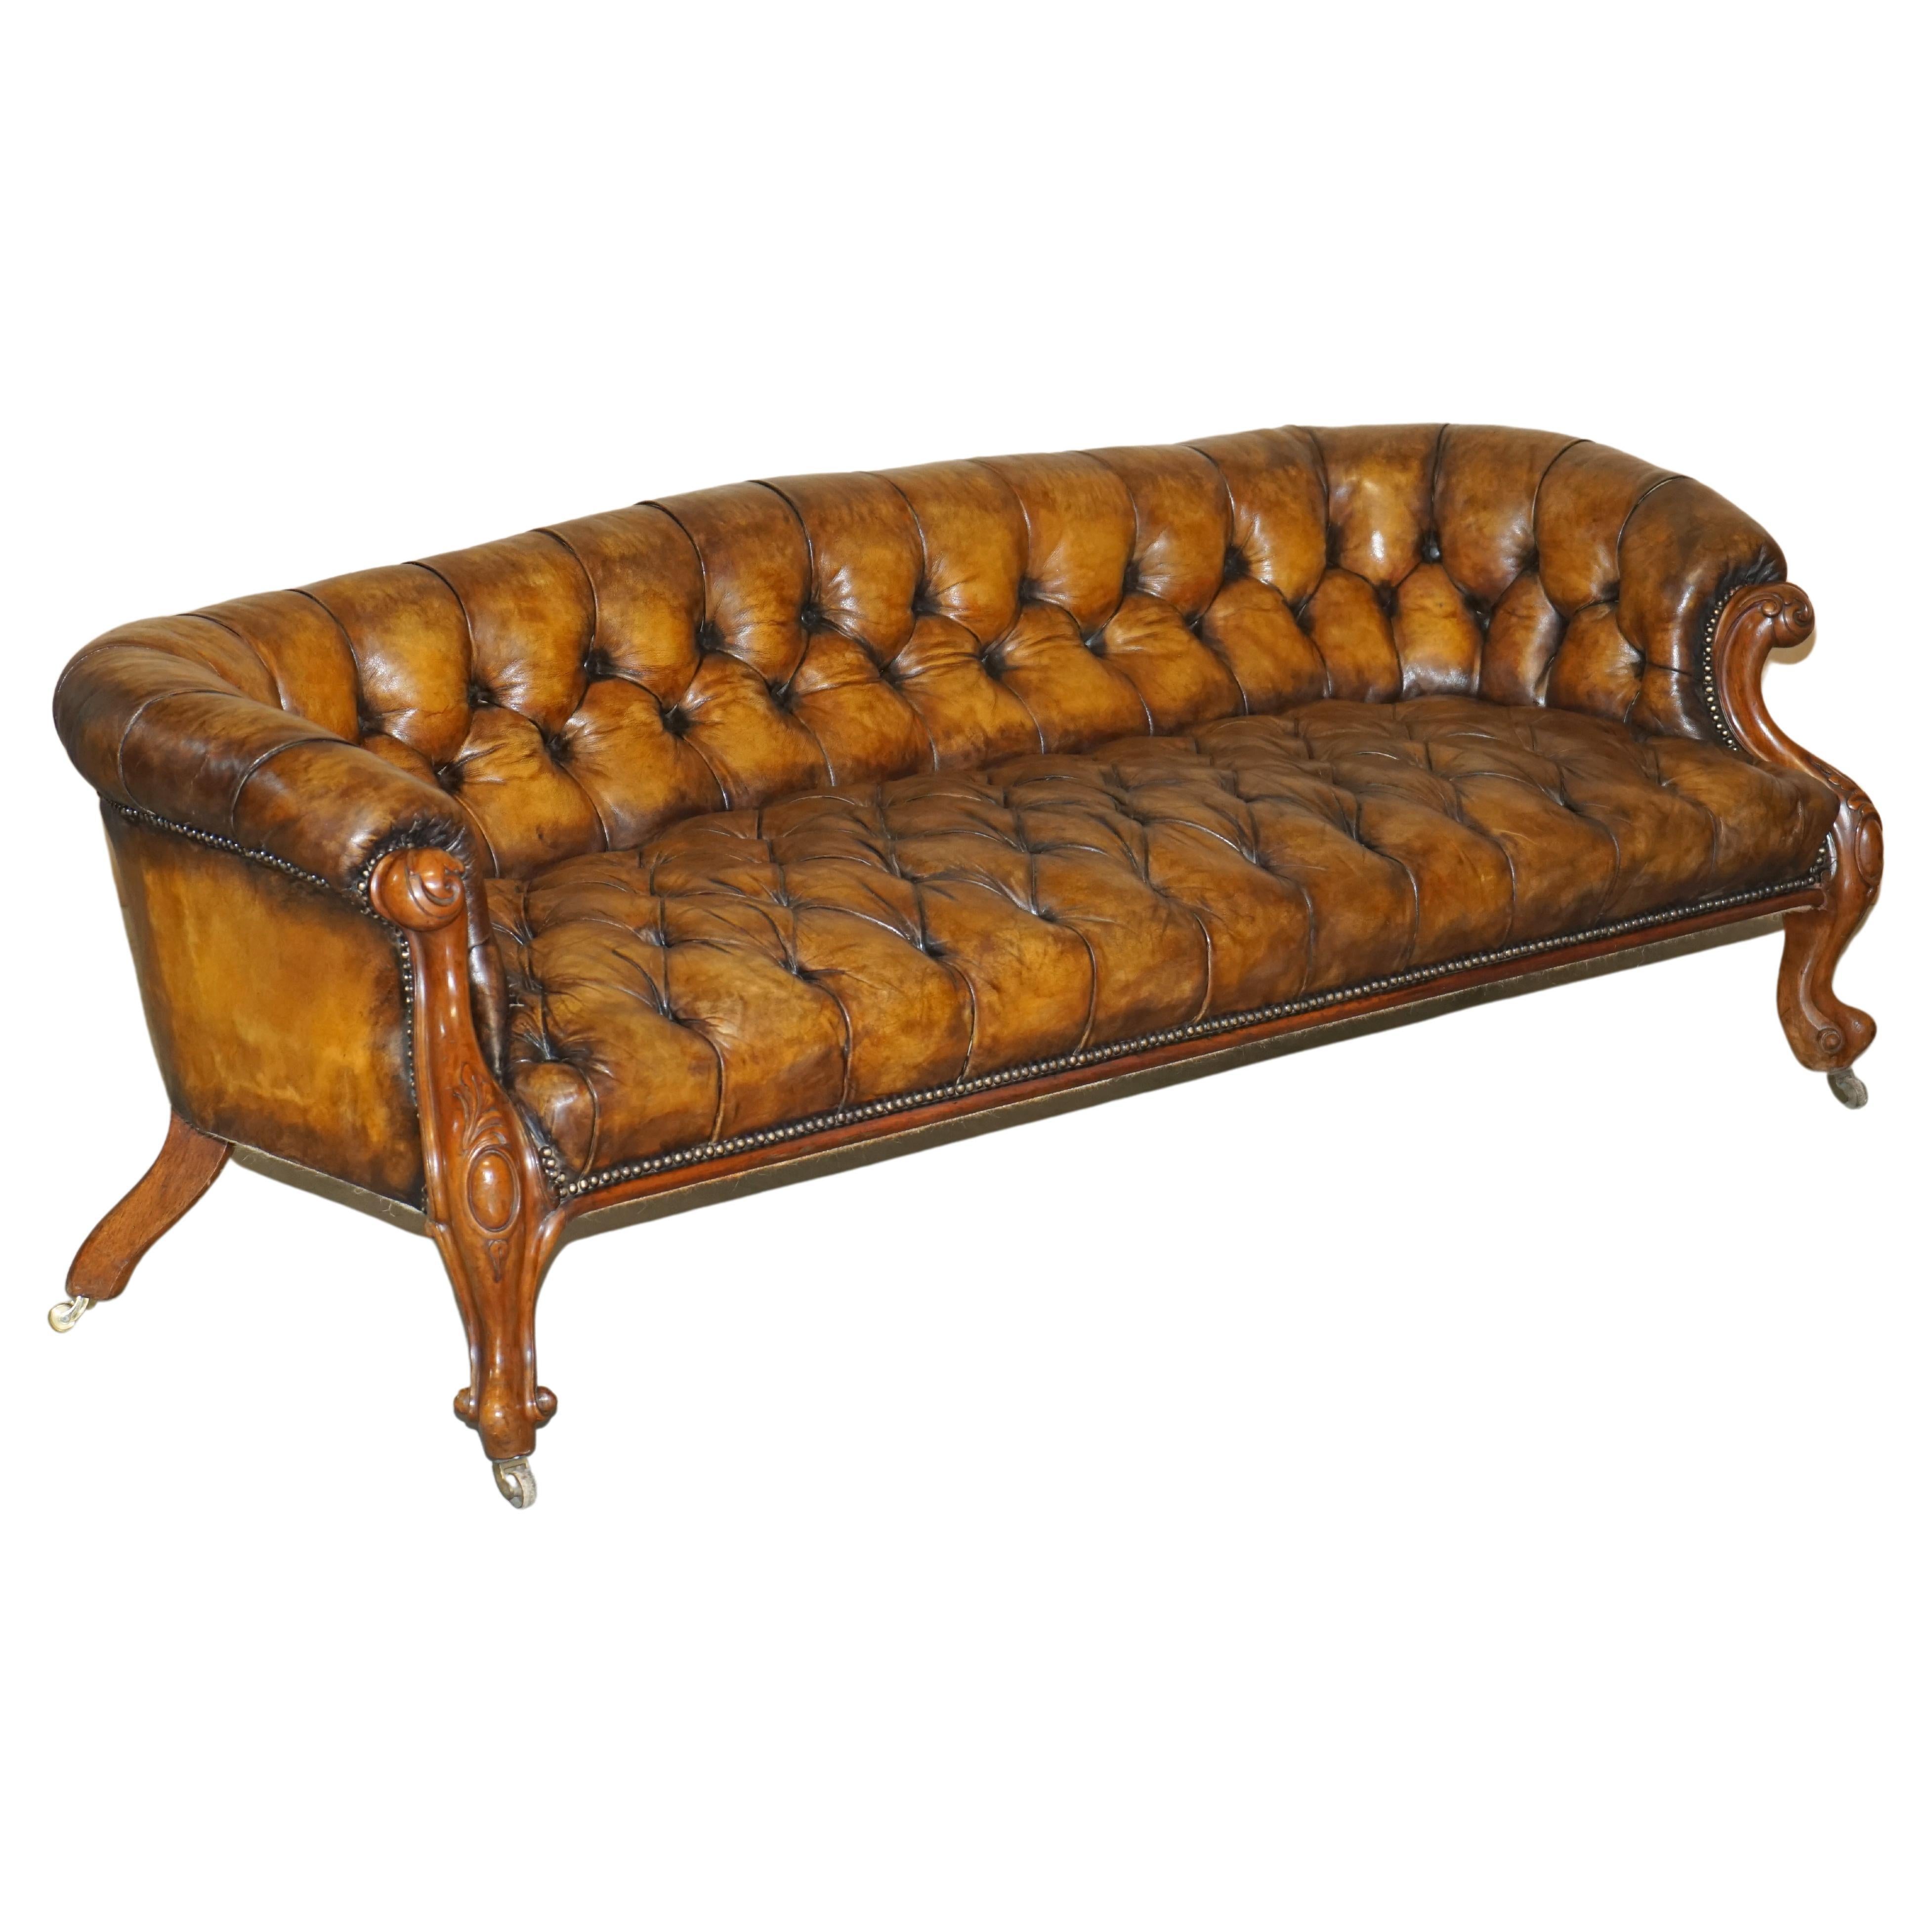 Antique Victorian 1860 Show Frame Carved Walnut Chesterfield Brown Leather Sofa For Sale